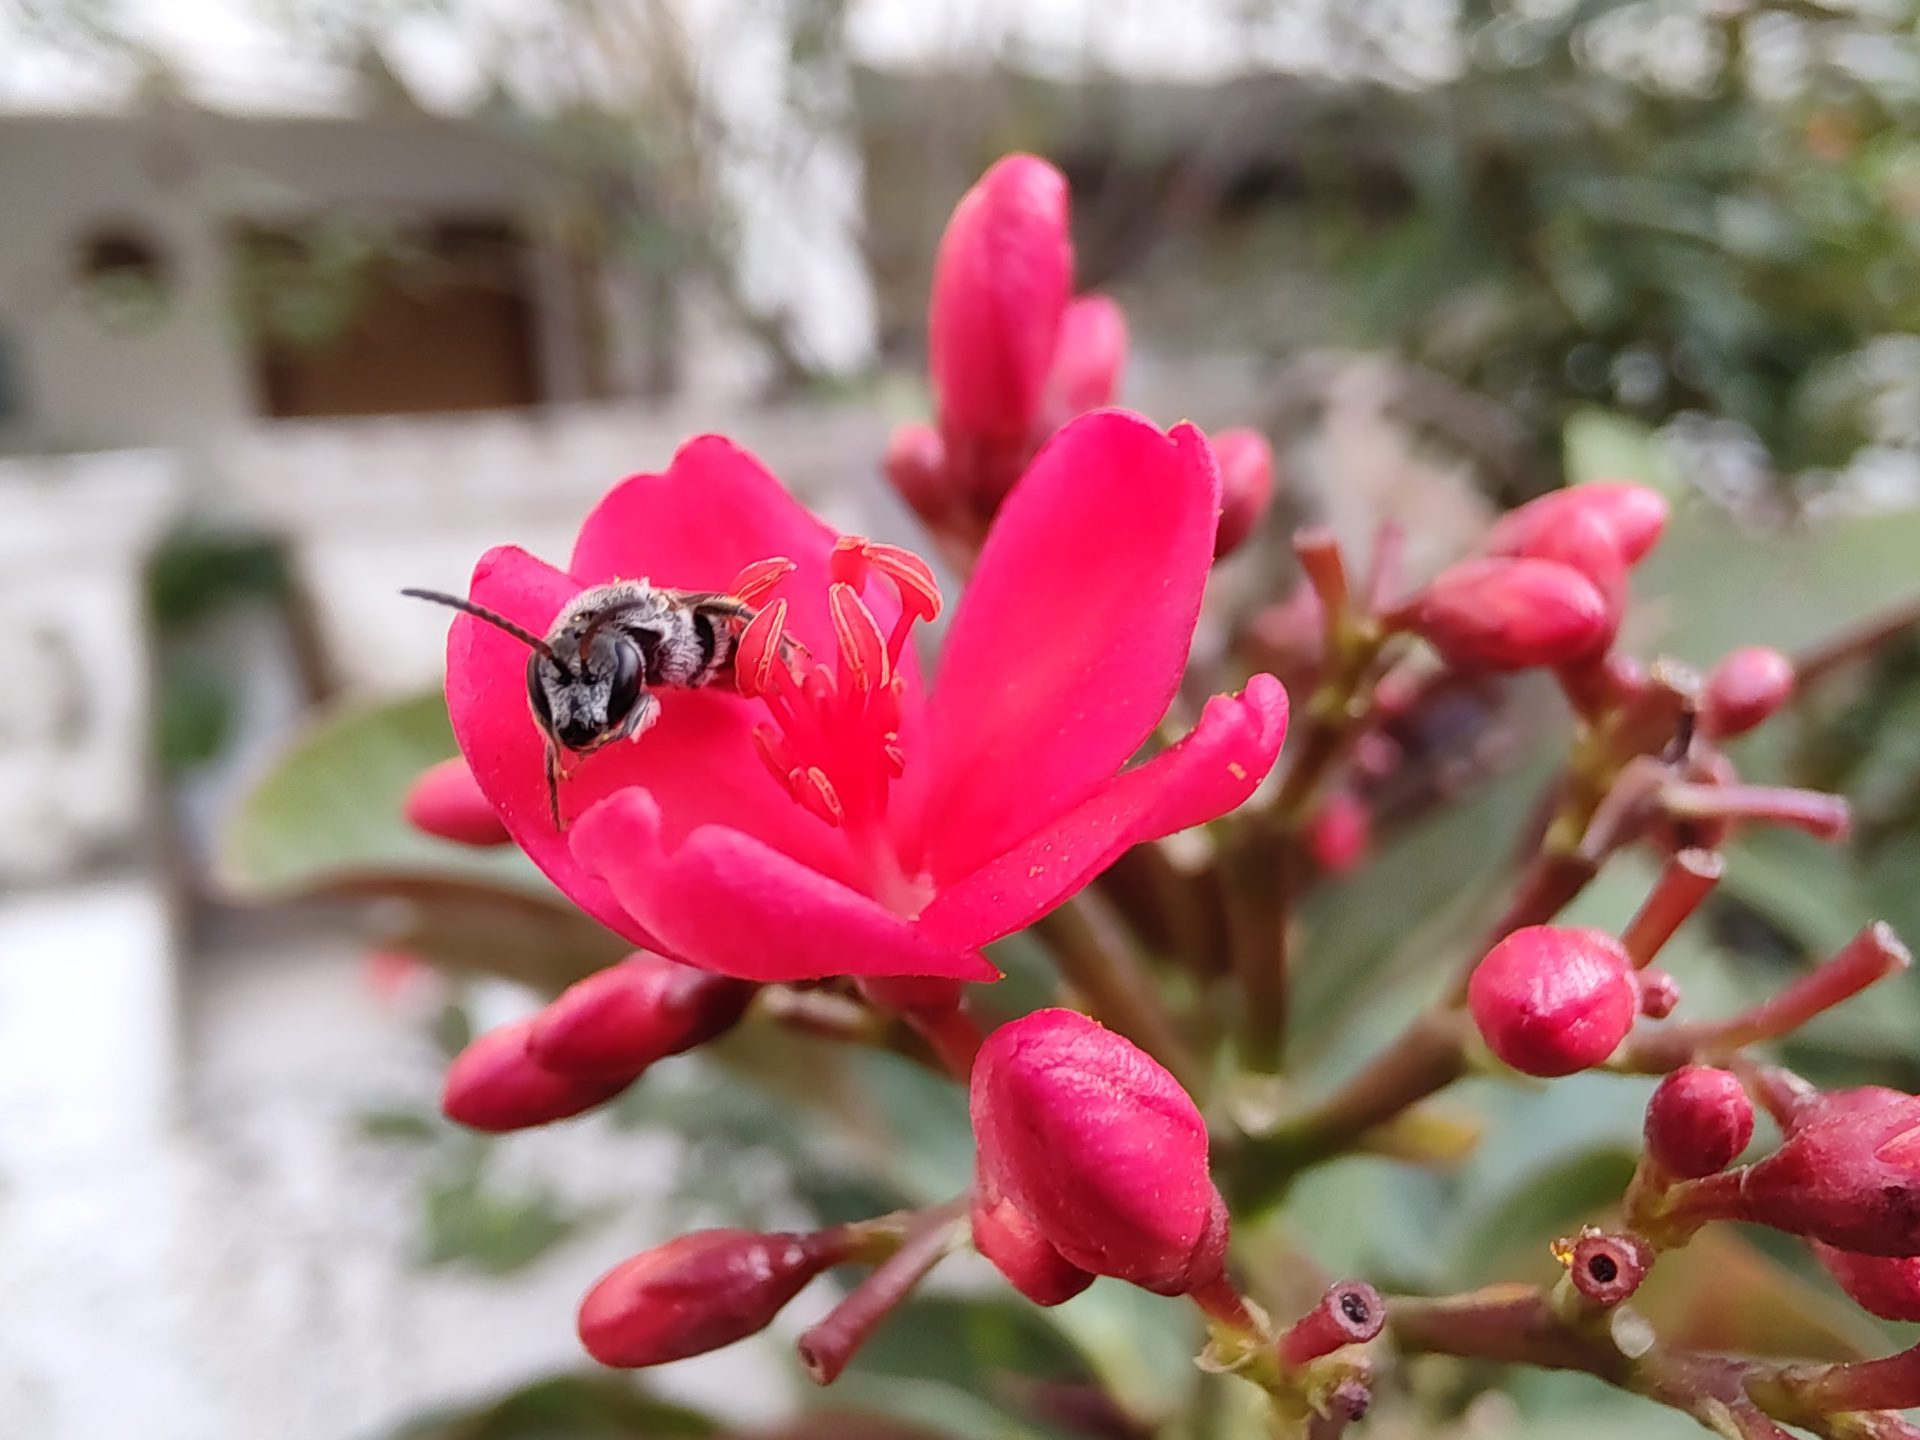 Moto Edge 20 pro macro camera shot of a pink flower with a bee in it